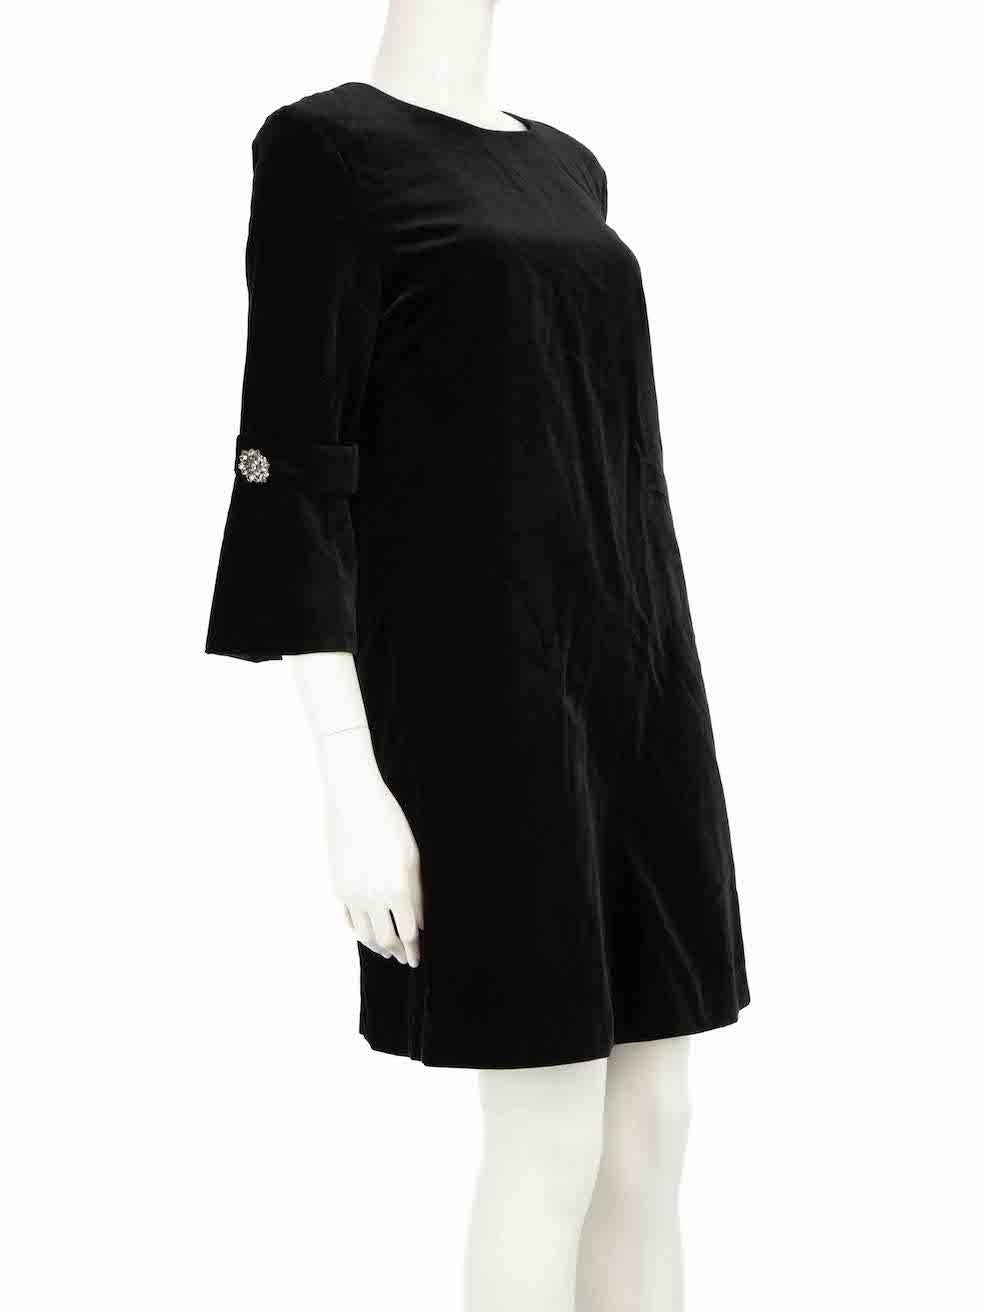 CONDITION is Never worn, with tags. No visible wear to dress is evident on this new goat designer resale item.
 
 
 
 Details
 
 
 Black
 
 Velvet
 
 Mini dress
 
 Round neckline
 
 Mid sleeves
 
 Crystal button on sleeves
 
 Back zip closure
 
 
 
